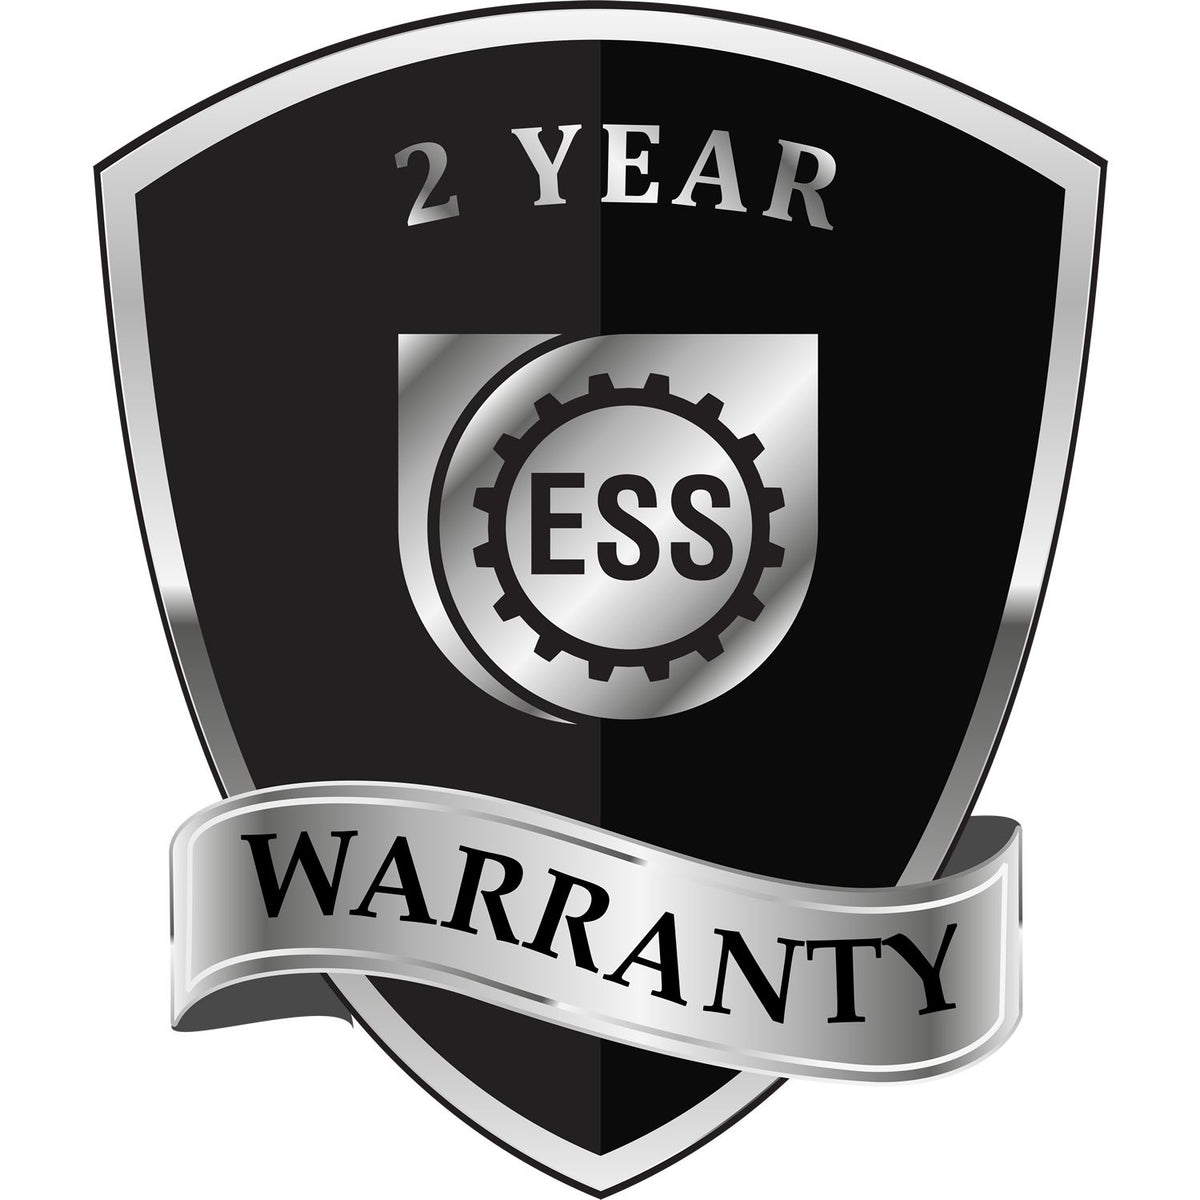 A black and silver badge or emblem showing warranty information for the Hybrid West Virginia Architect Seal